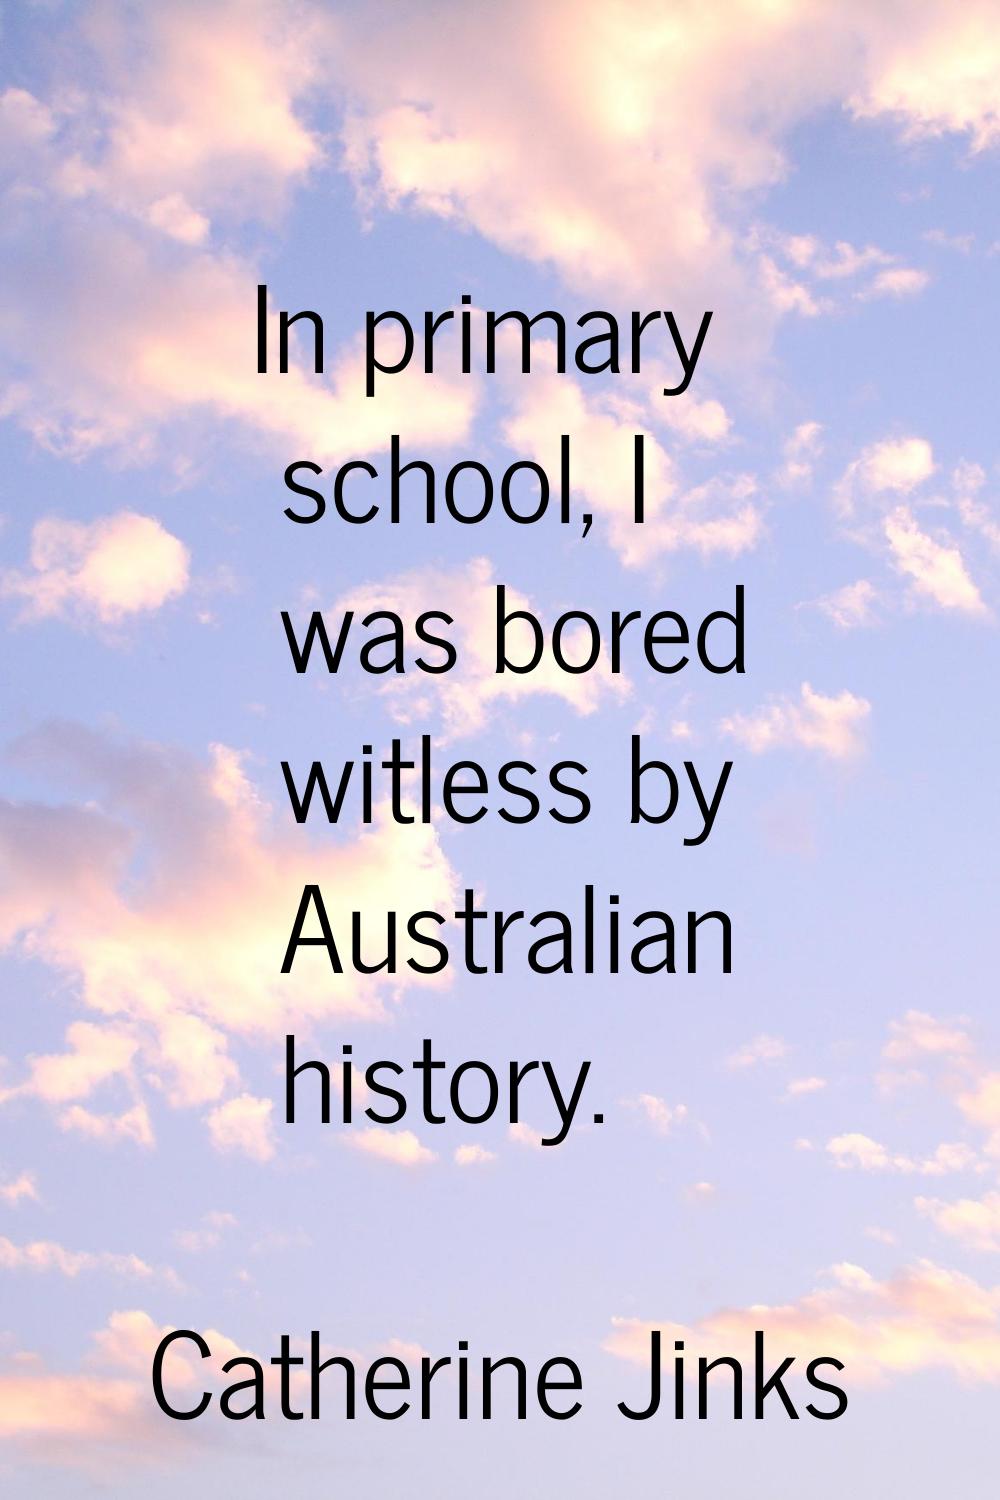 In primary school, I was bored witless by Australian history.